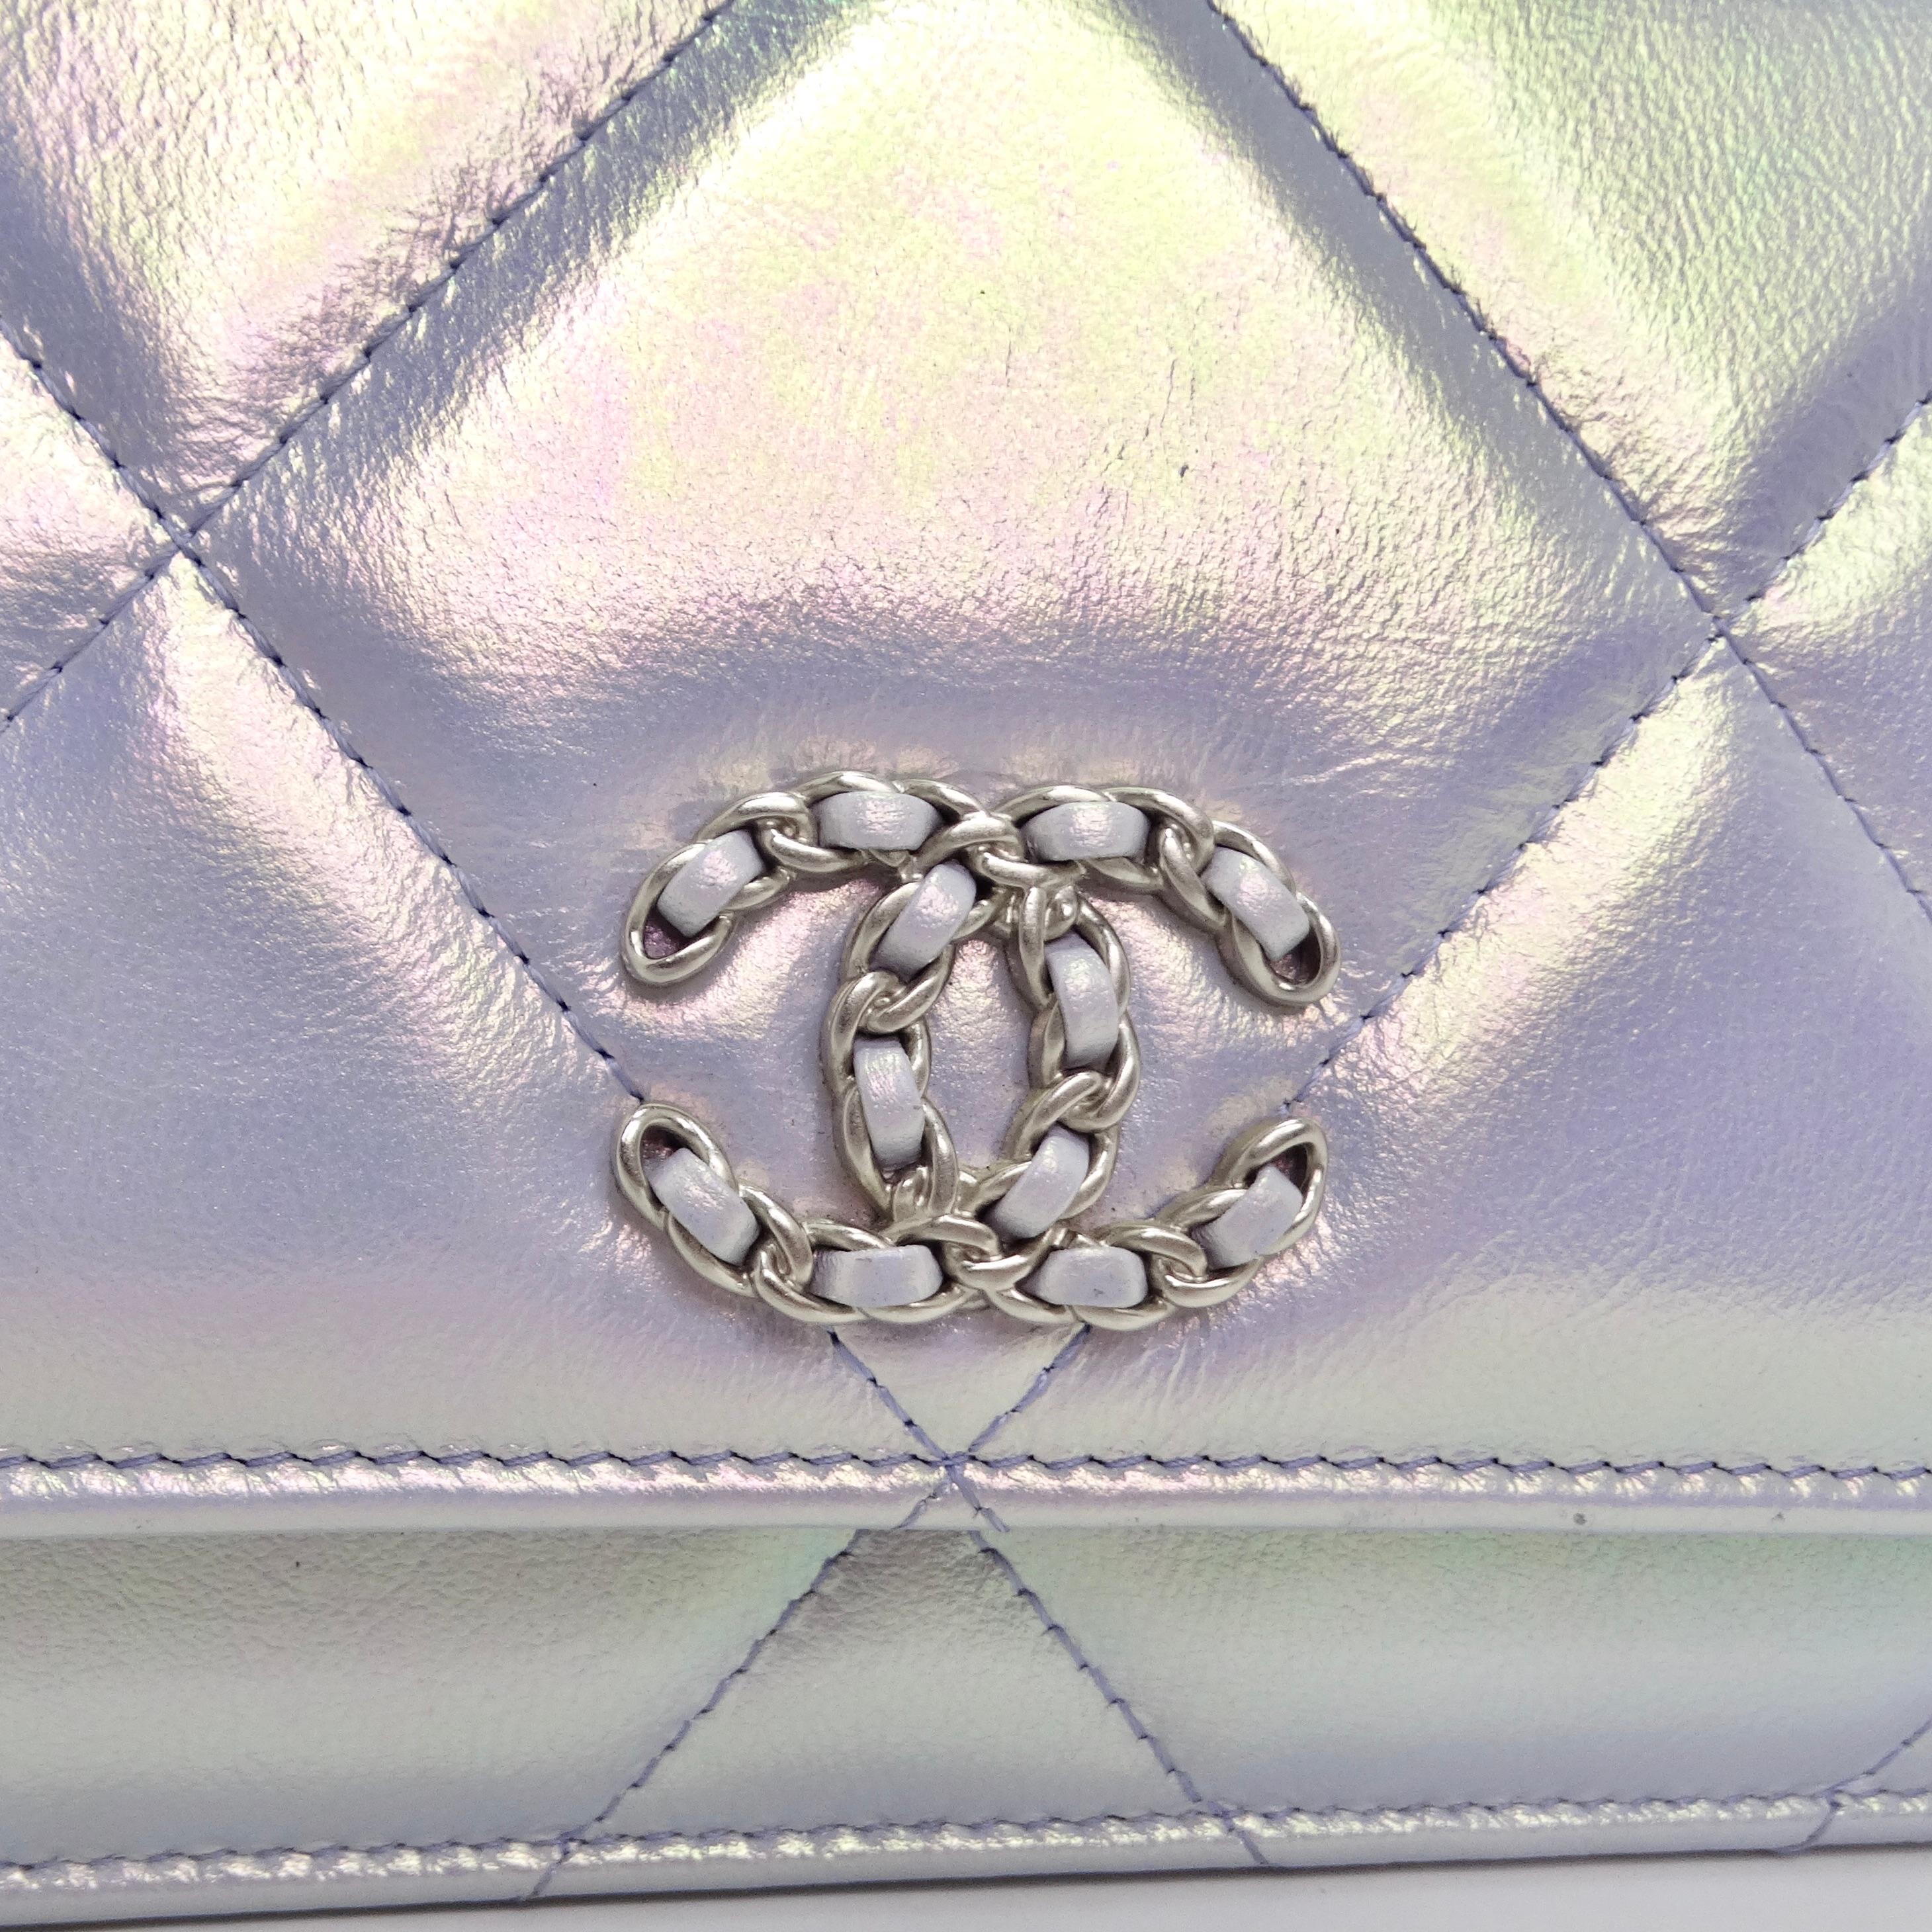 Iridescent Calfskin Quilted Medium Chanel 19 Flap Bag In Excellent Condition For Sale In Scottsdale, AZ